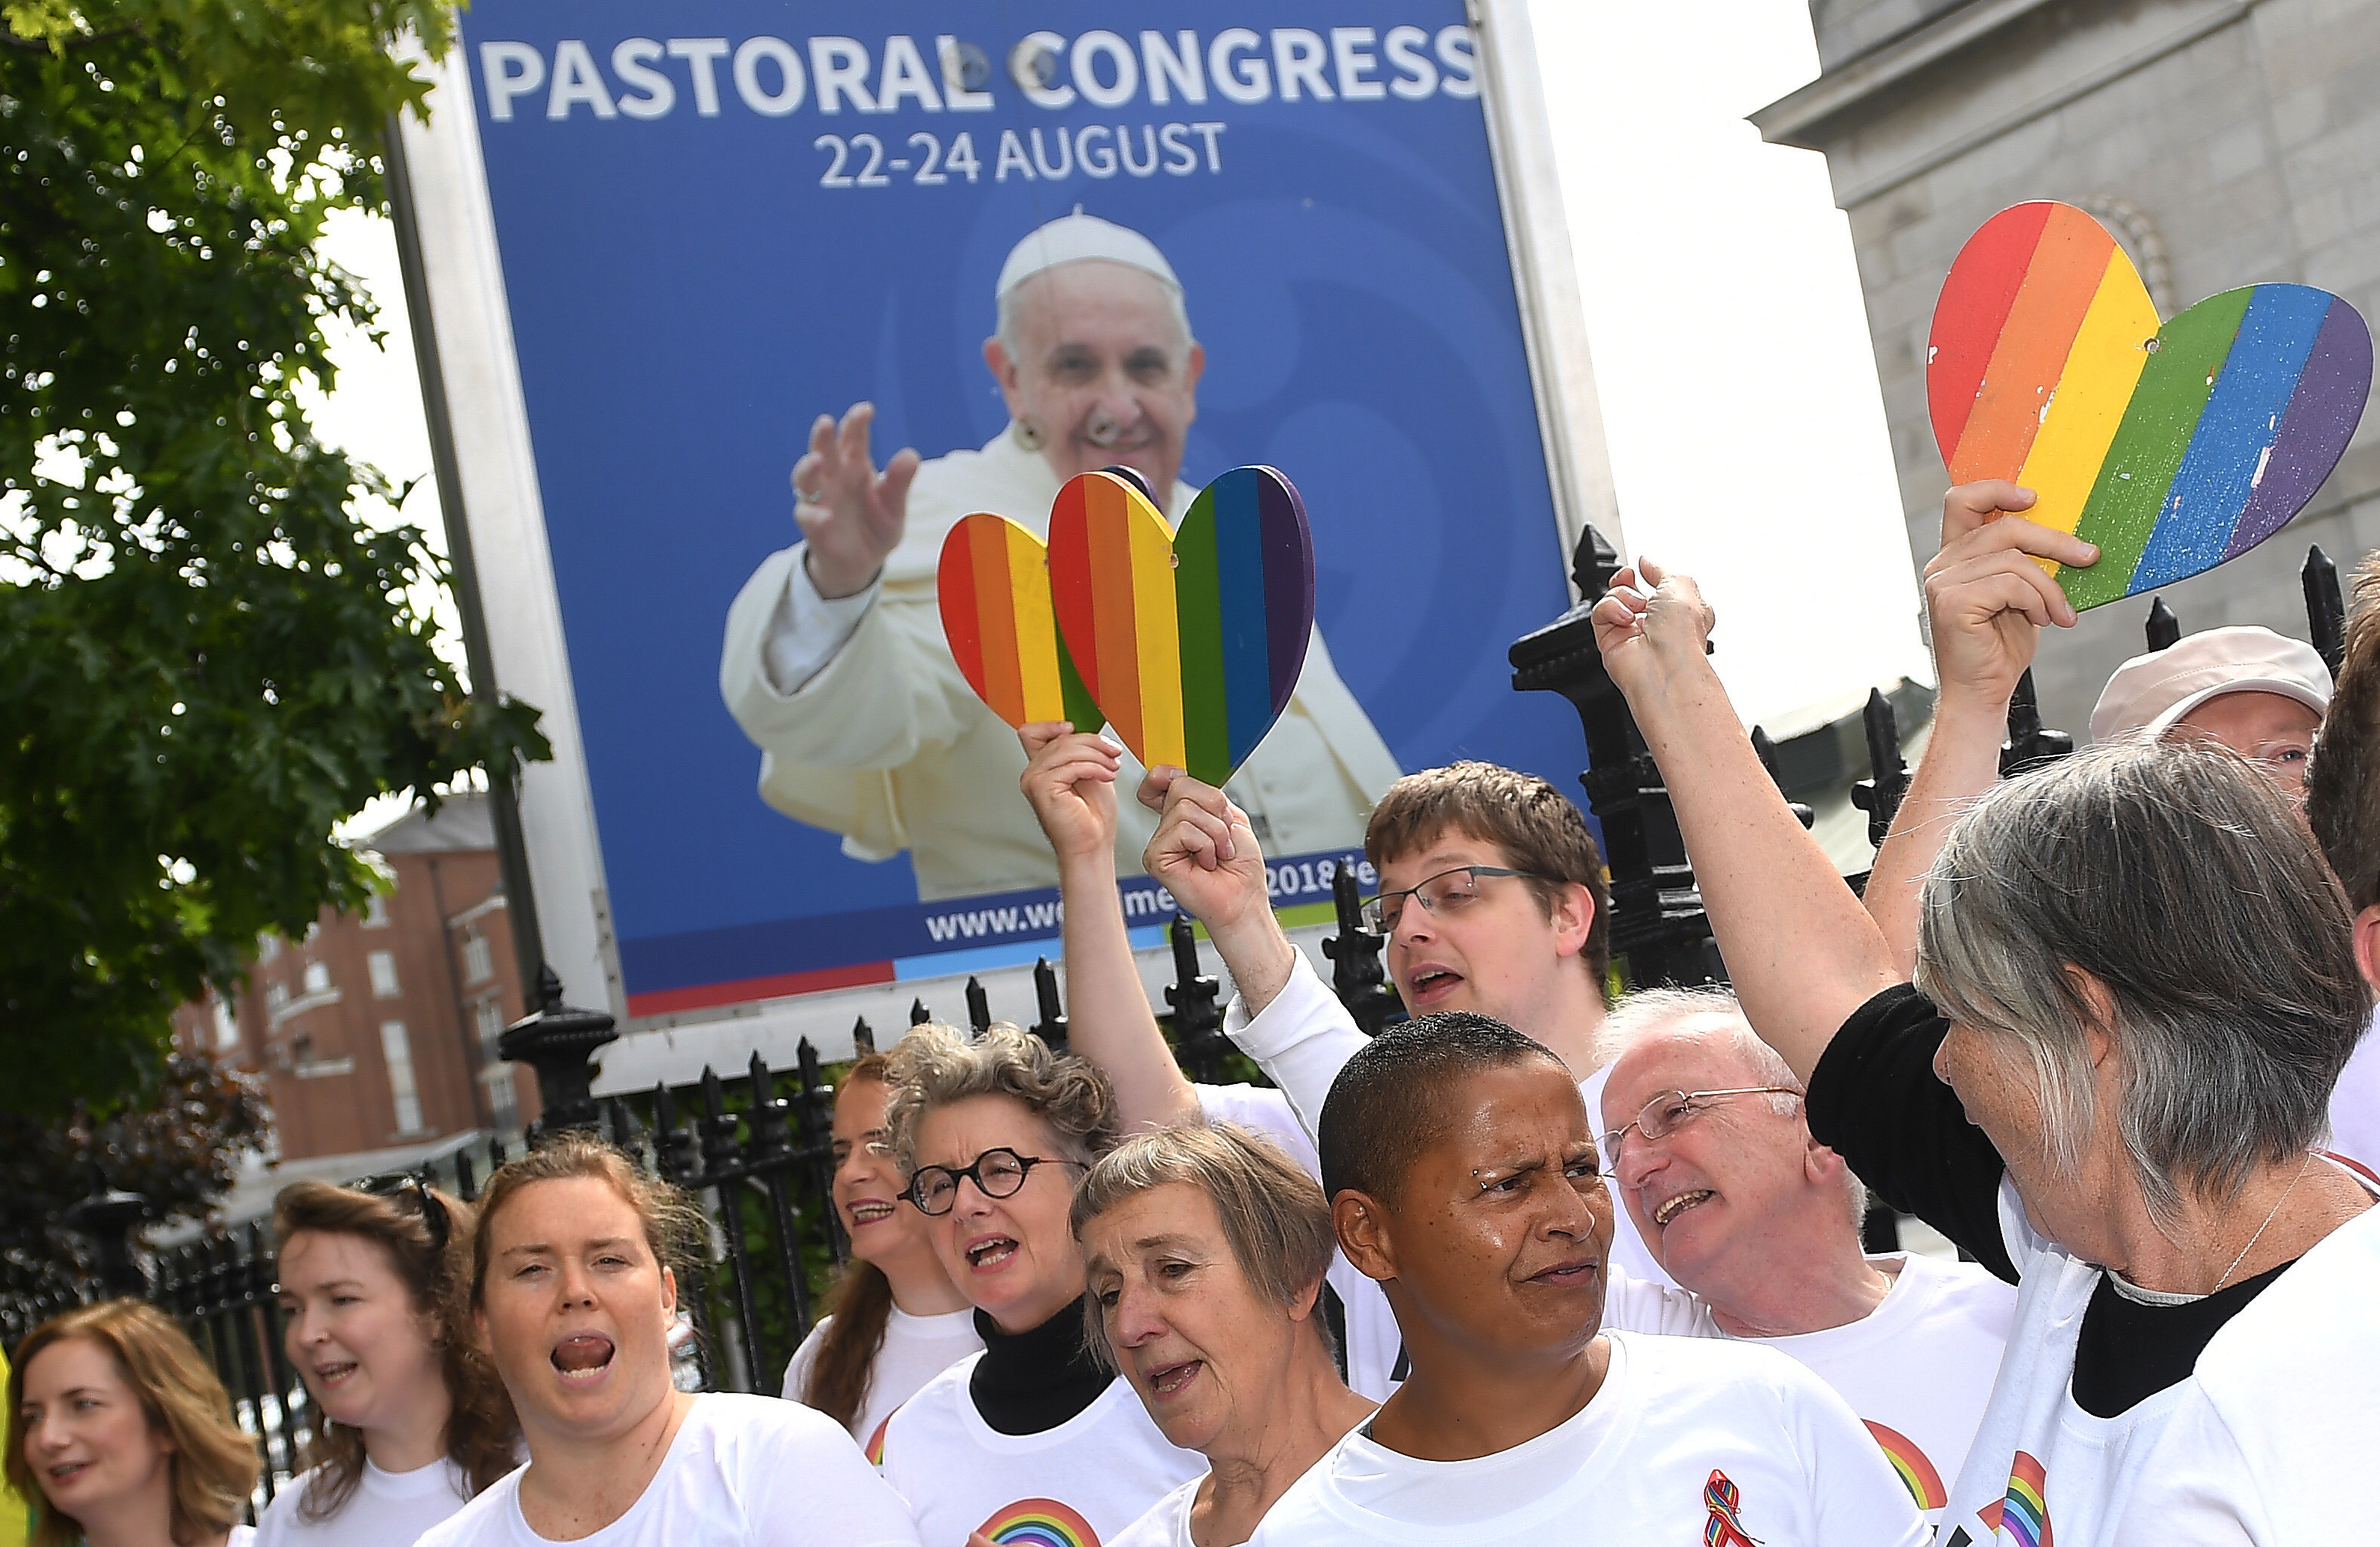 Bisexual Porn Magazine 1960s - Father James Martin: How parishes can welcome L.G.B.T. ...